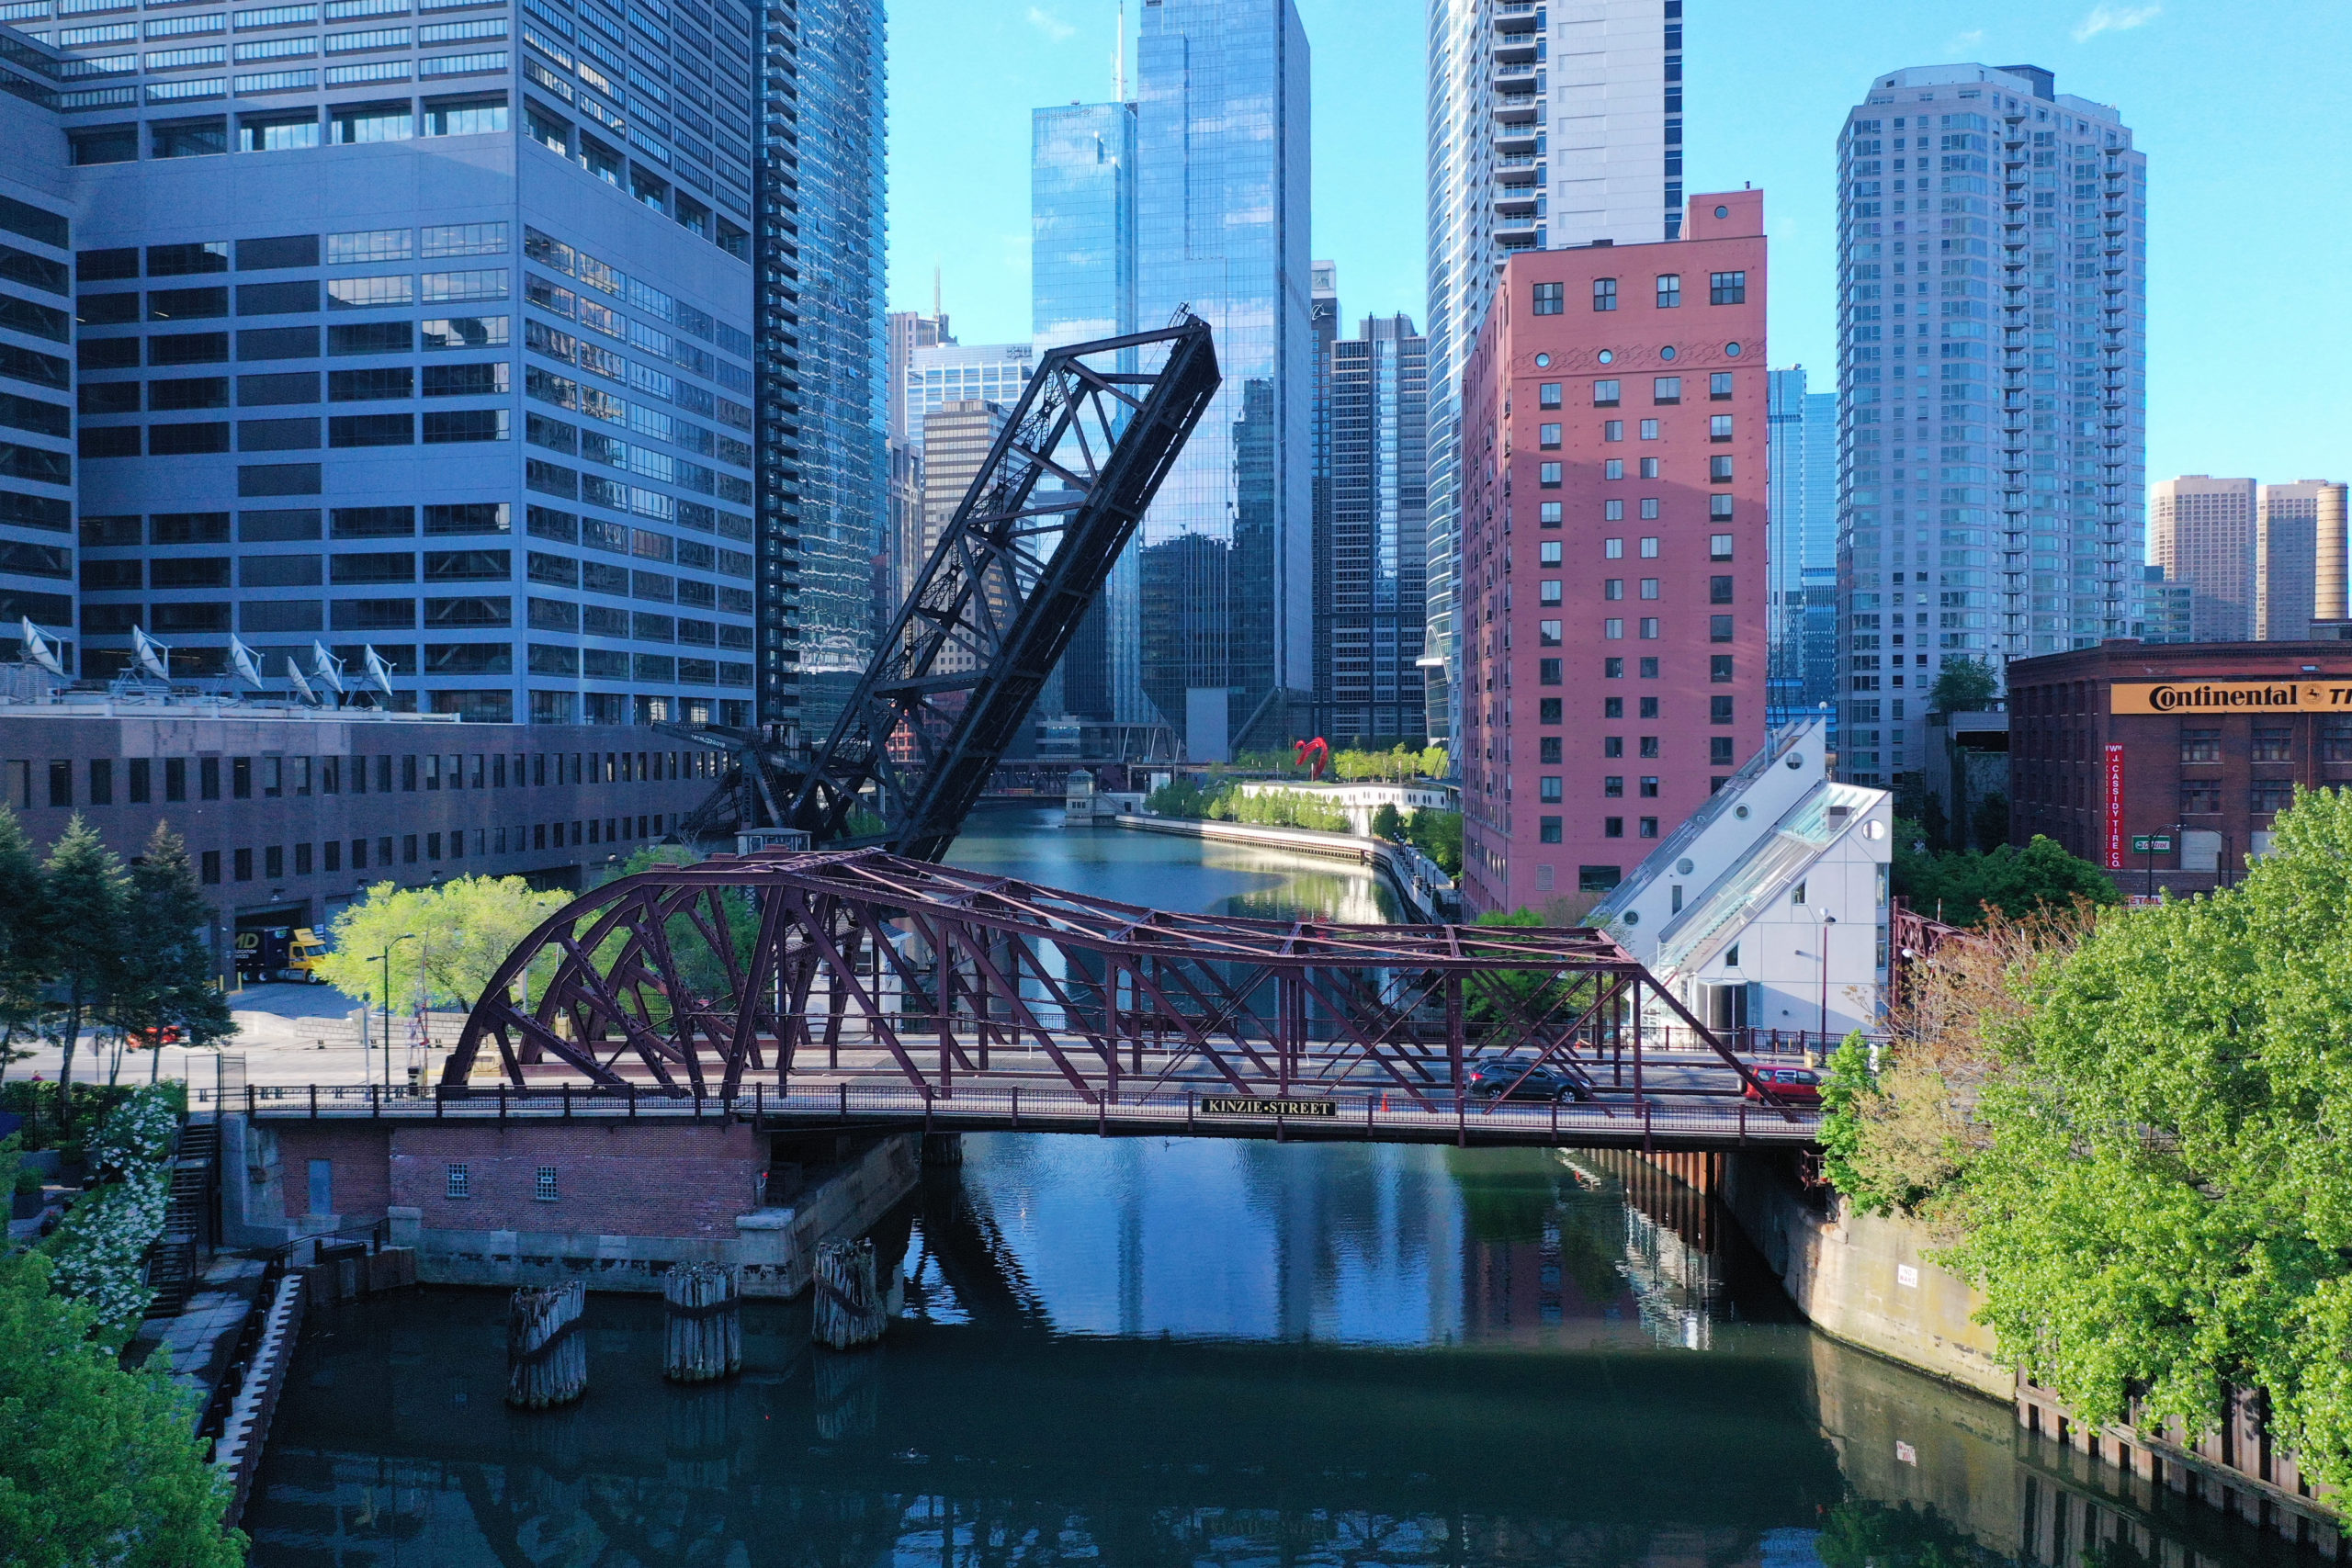 South-facing view of the Kinzie Street Bridge on the Chicago River (color)